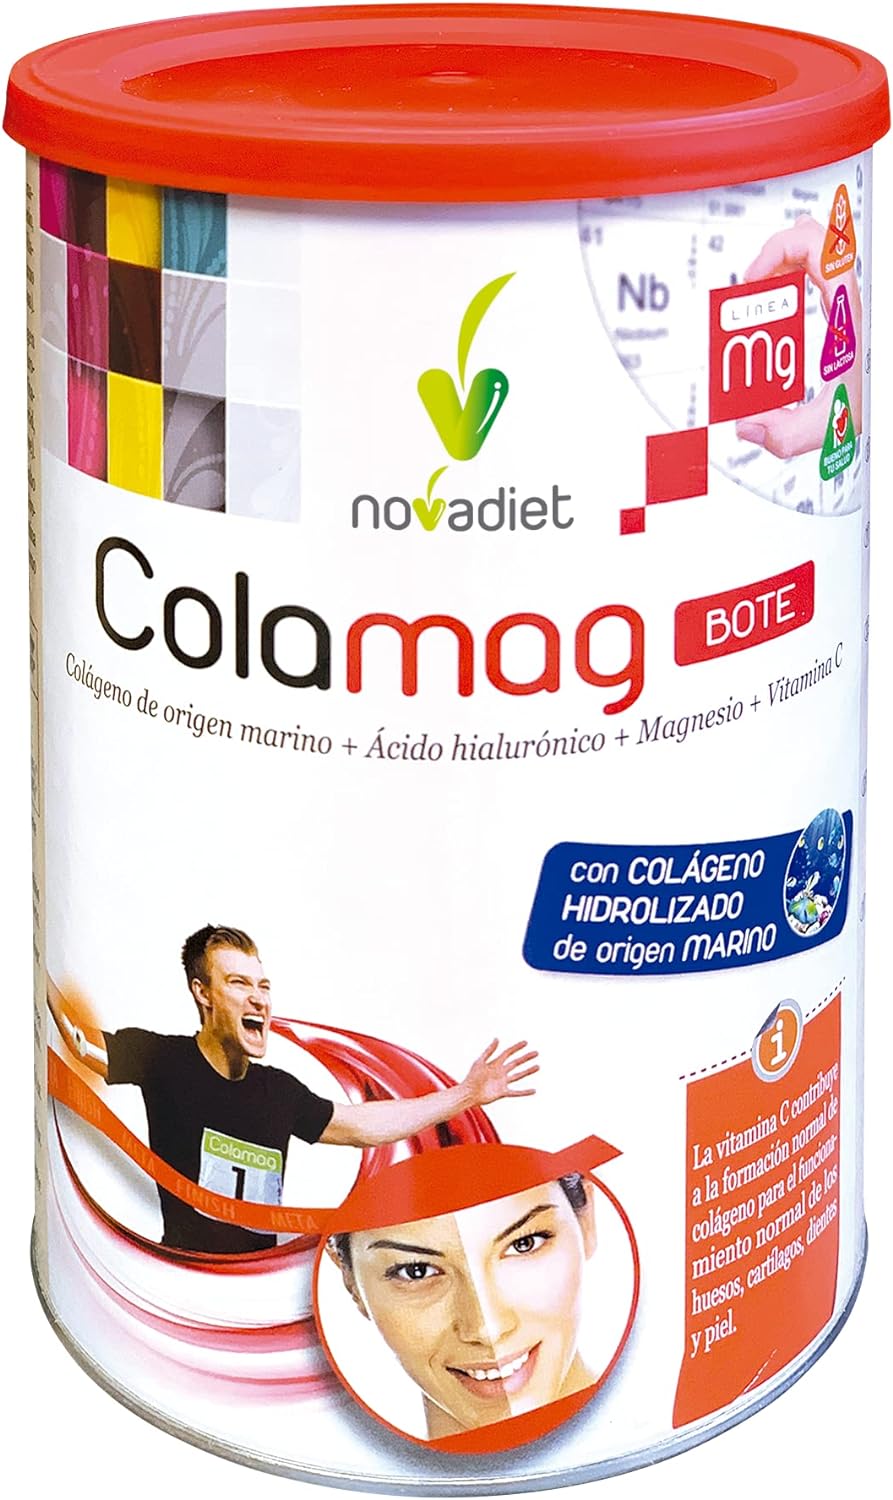 Novadiet Colamag Bote Marine Collagen with Hyaluronic Acid 300g